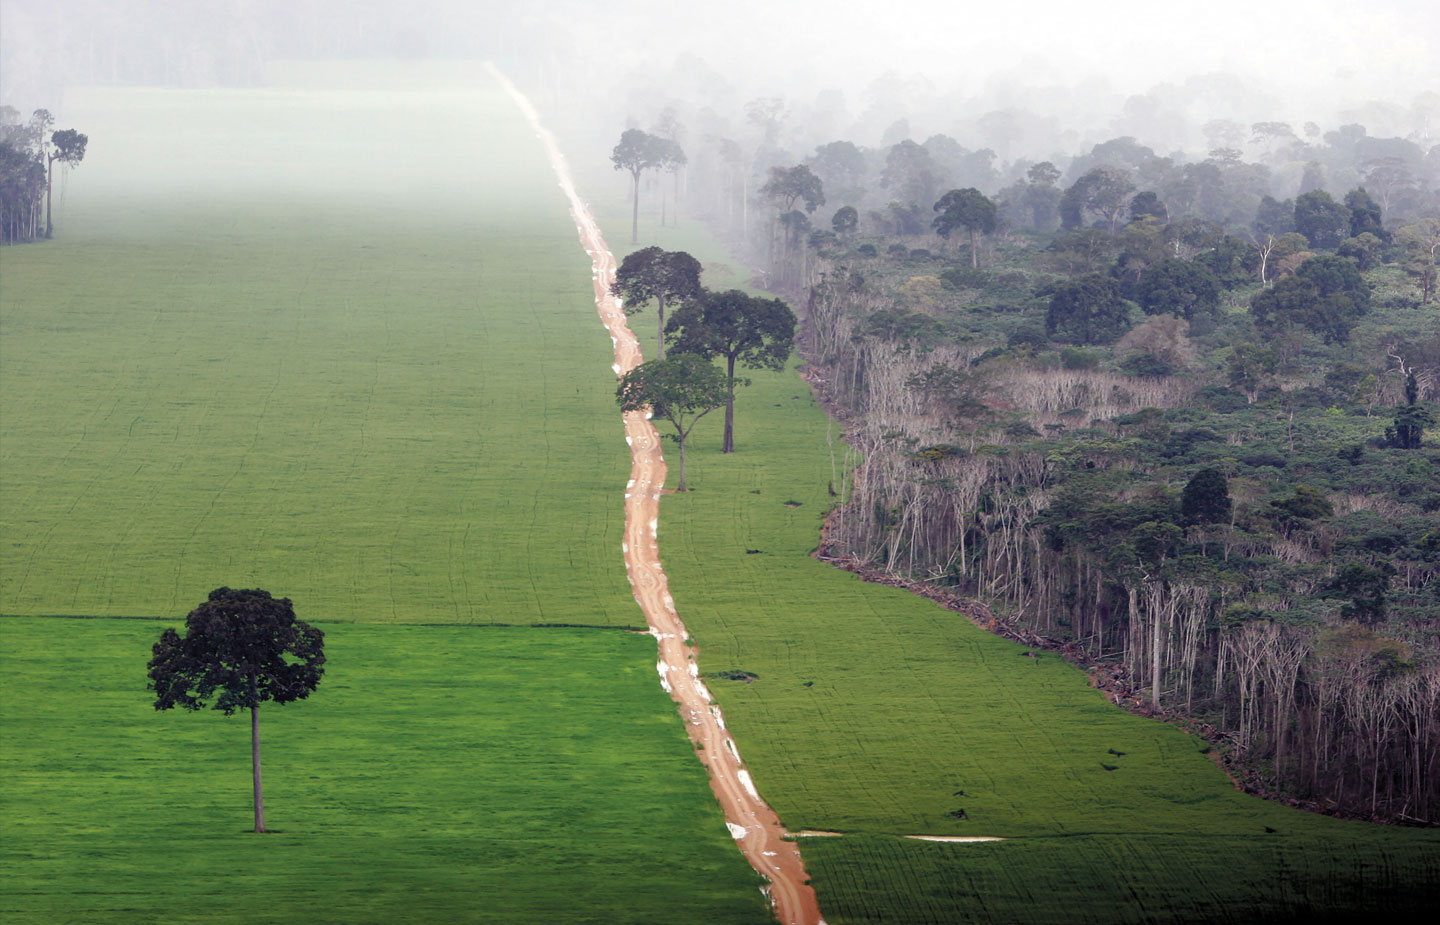 Image of a cleared forest in the Amazon jungle